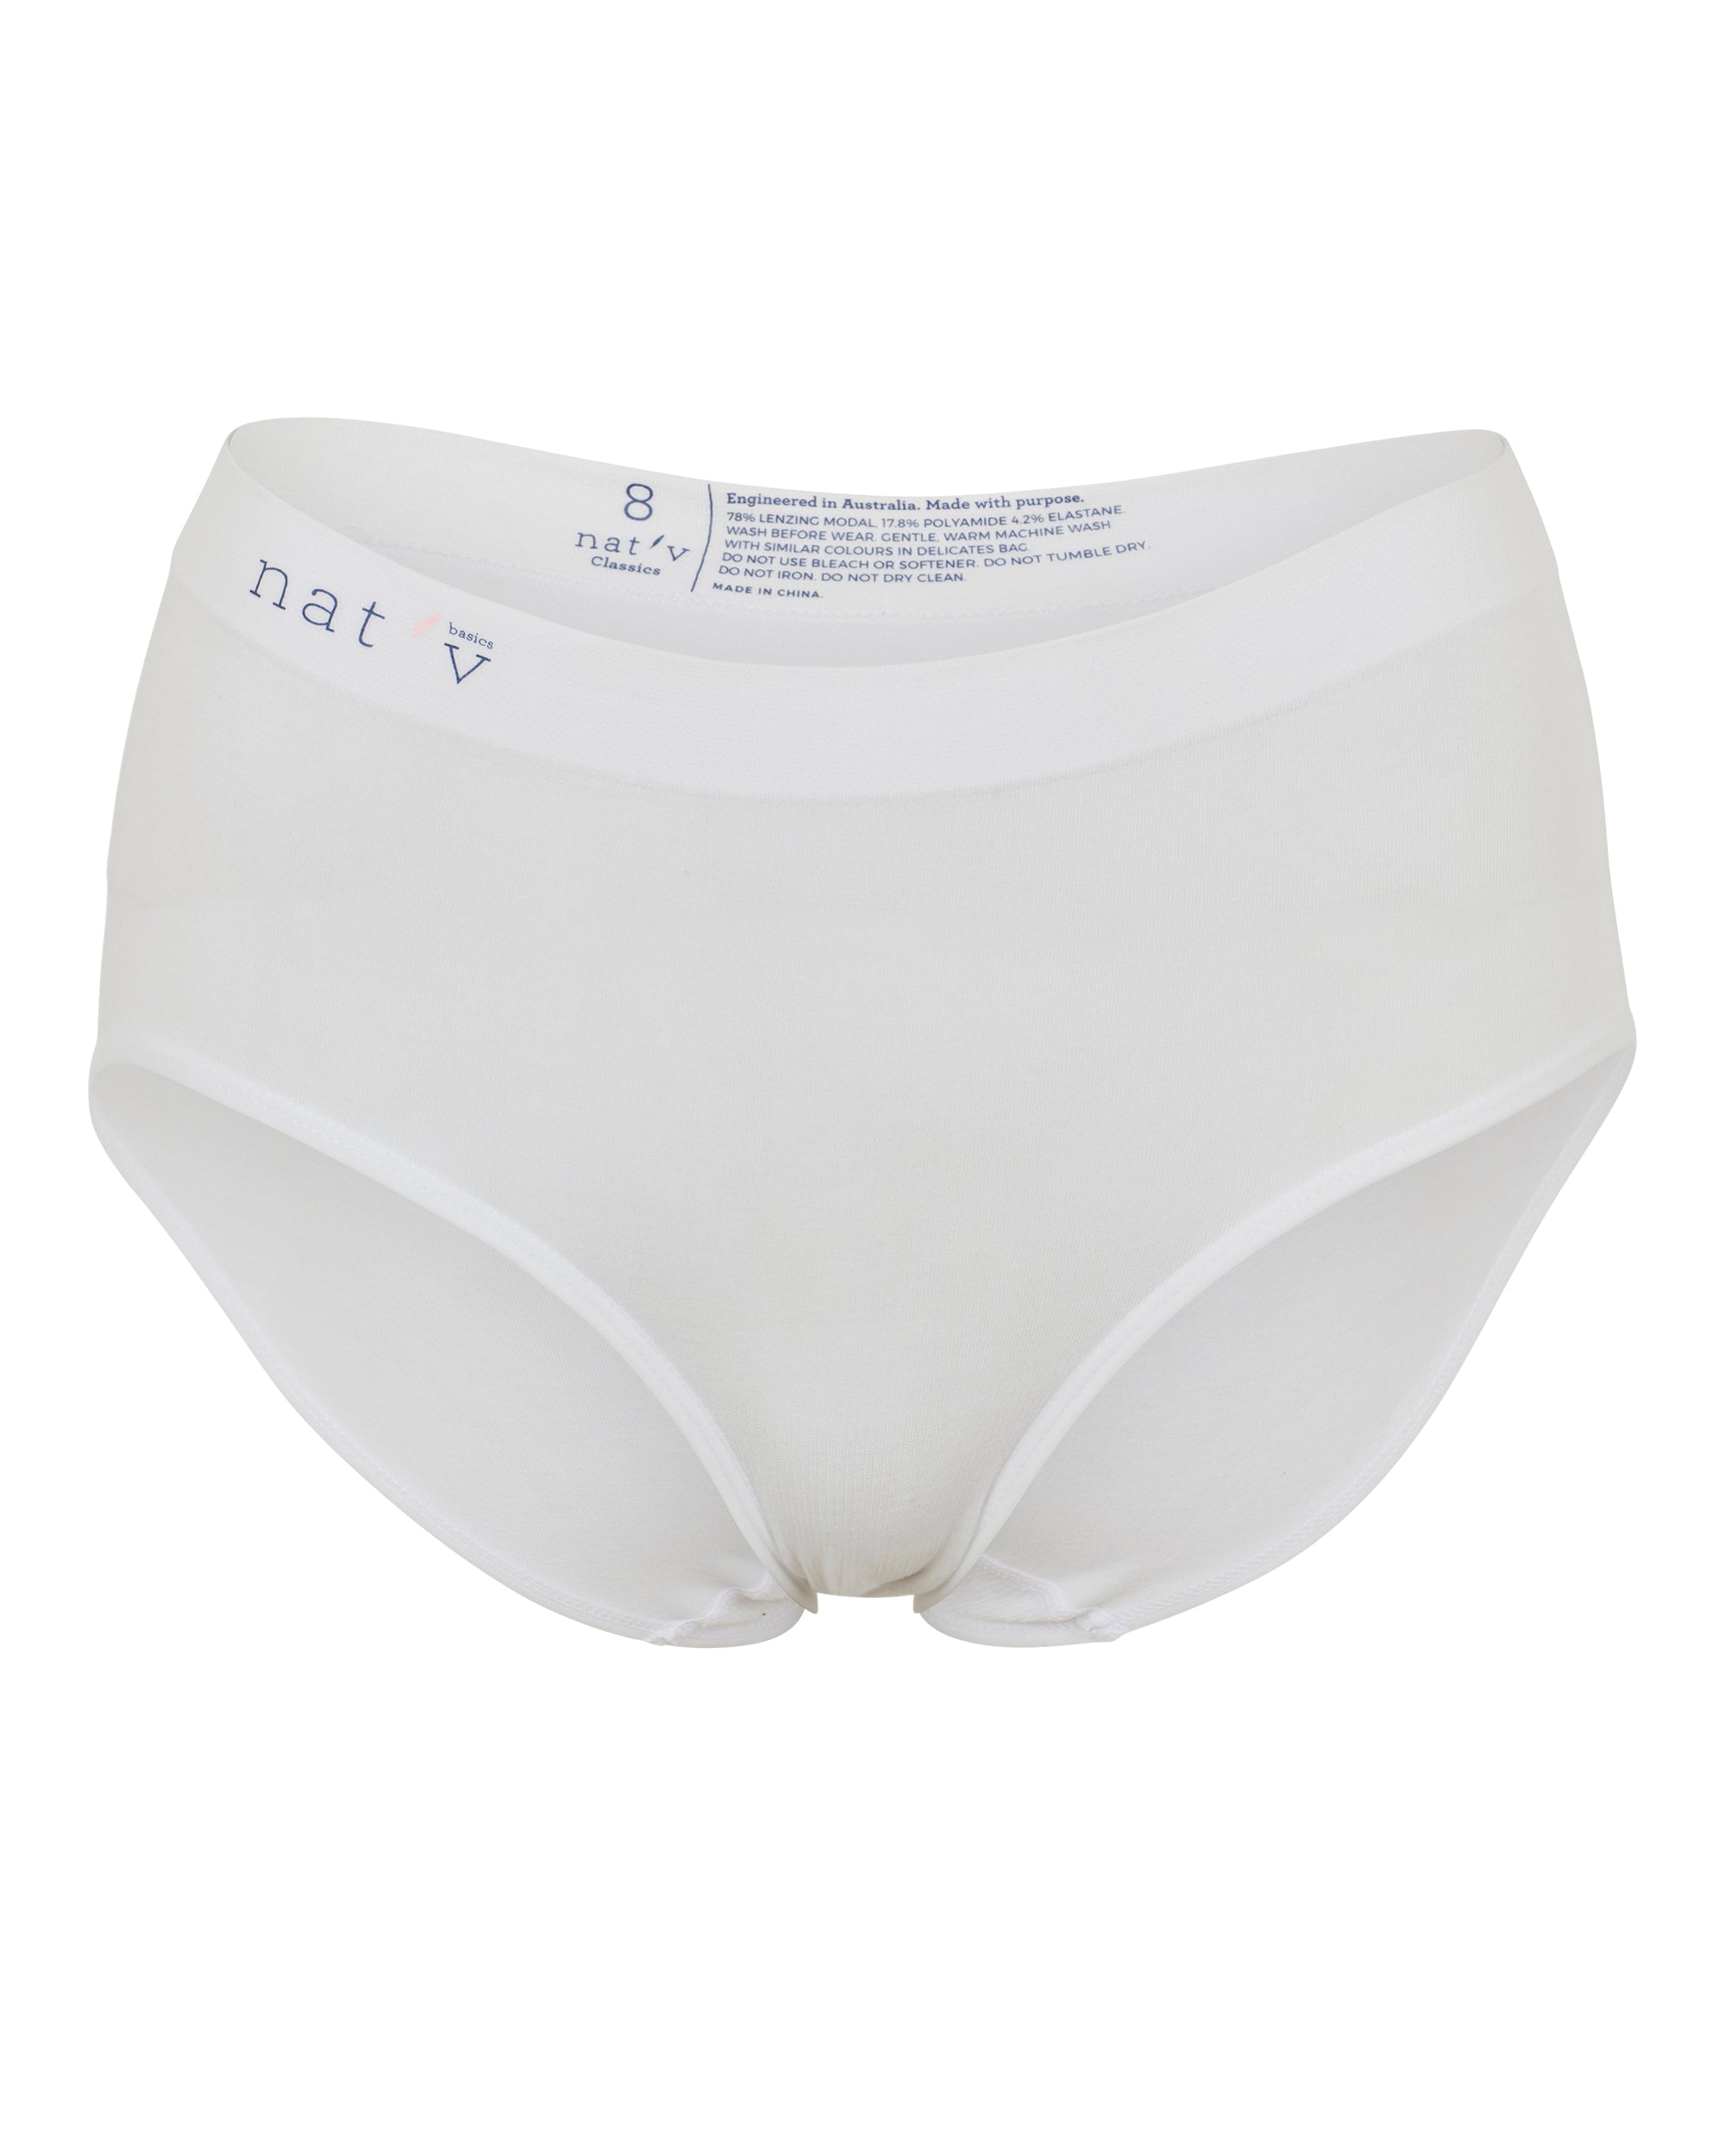 Vintage New With Tags Cortlalnd High Waist Firm Control Brief White 